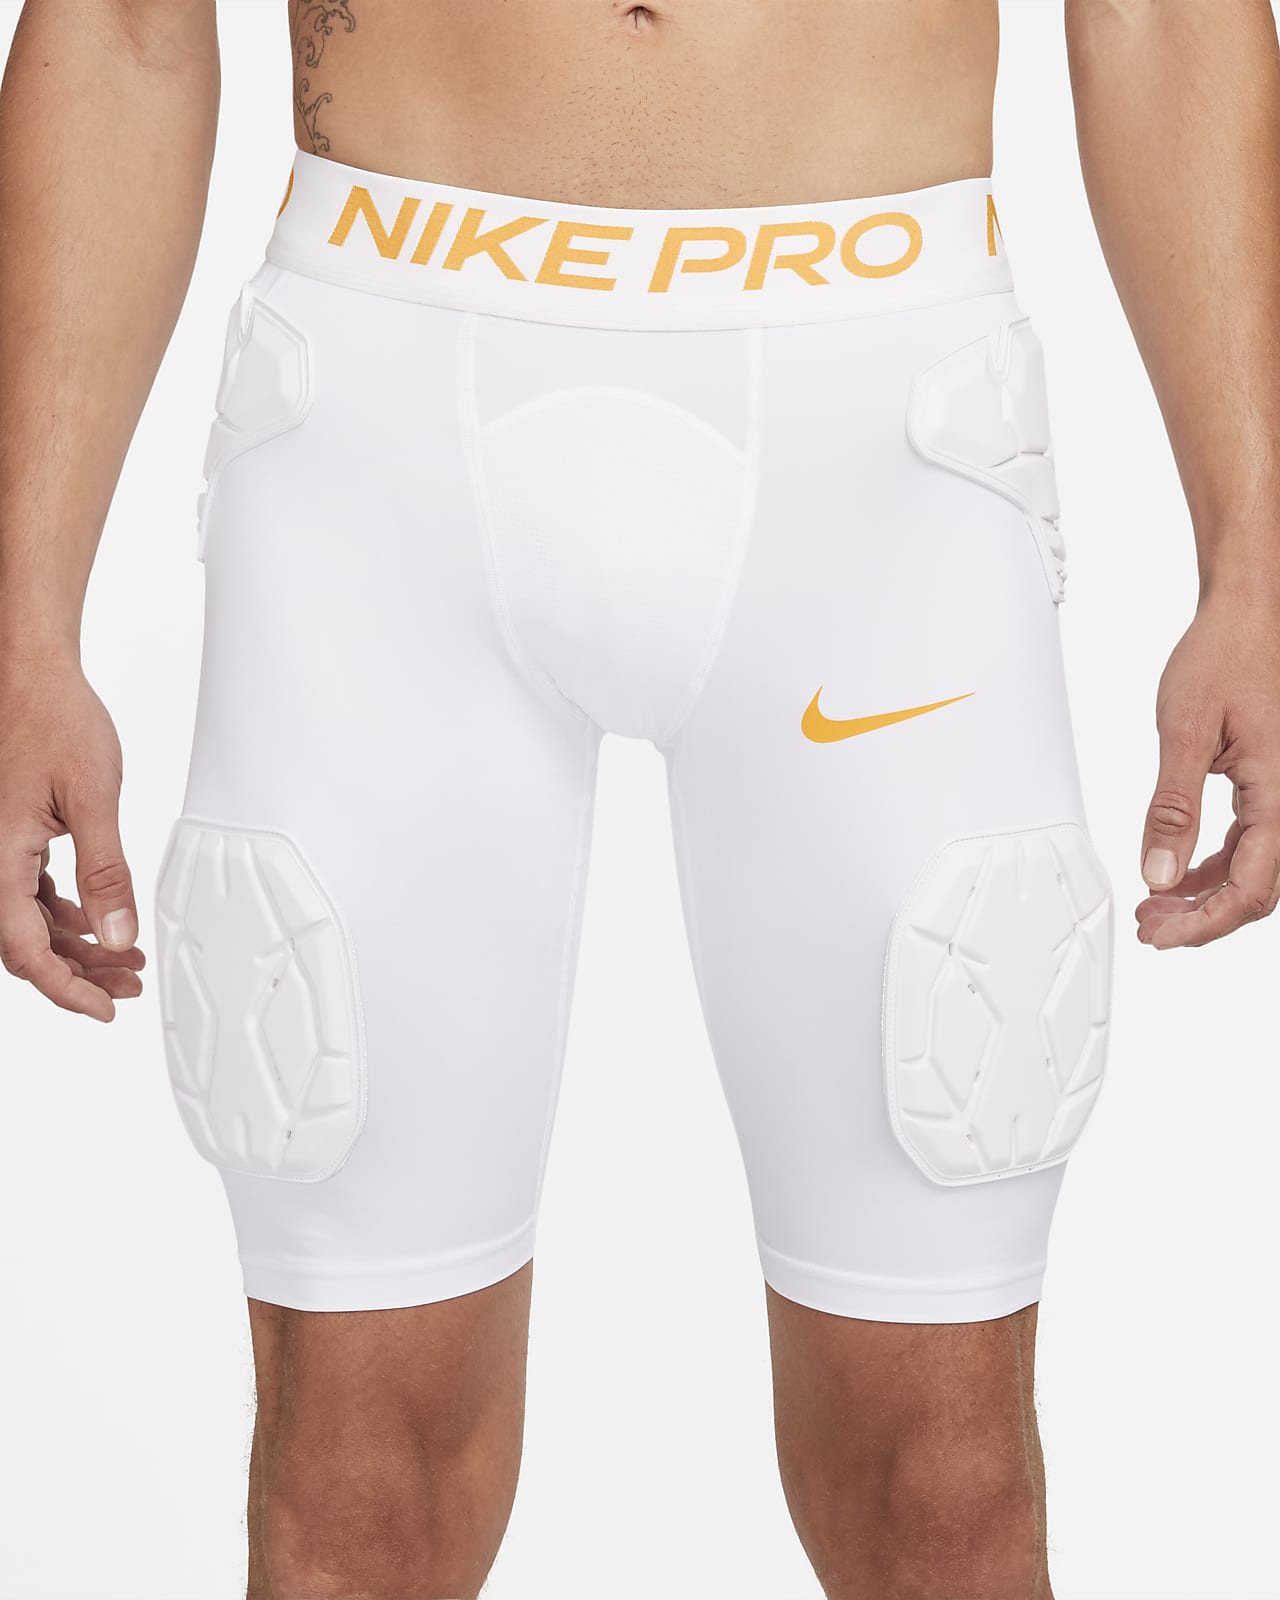 Nike Men's Pro Hyperstrong Compression Dri-FIT Football Padded